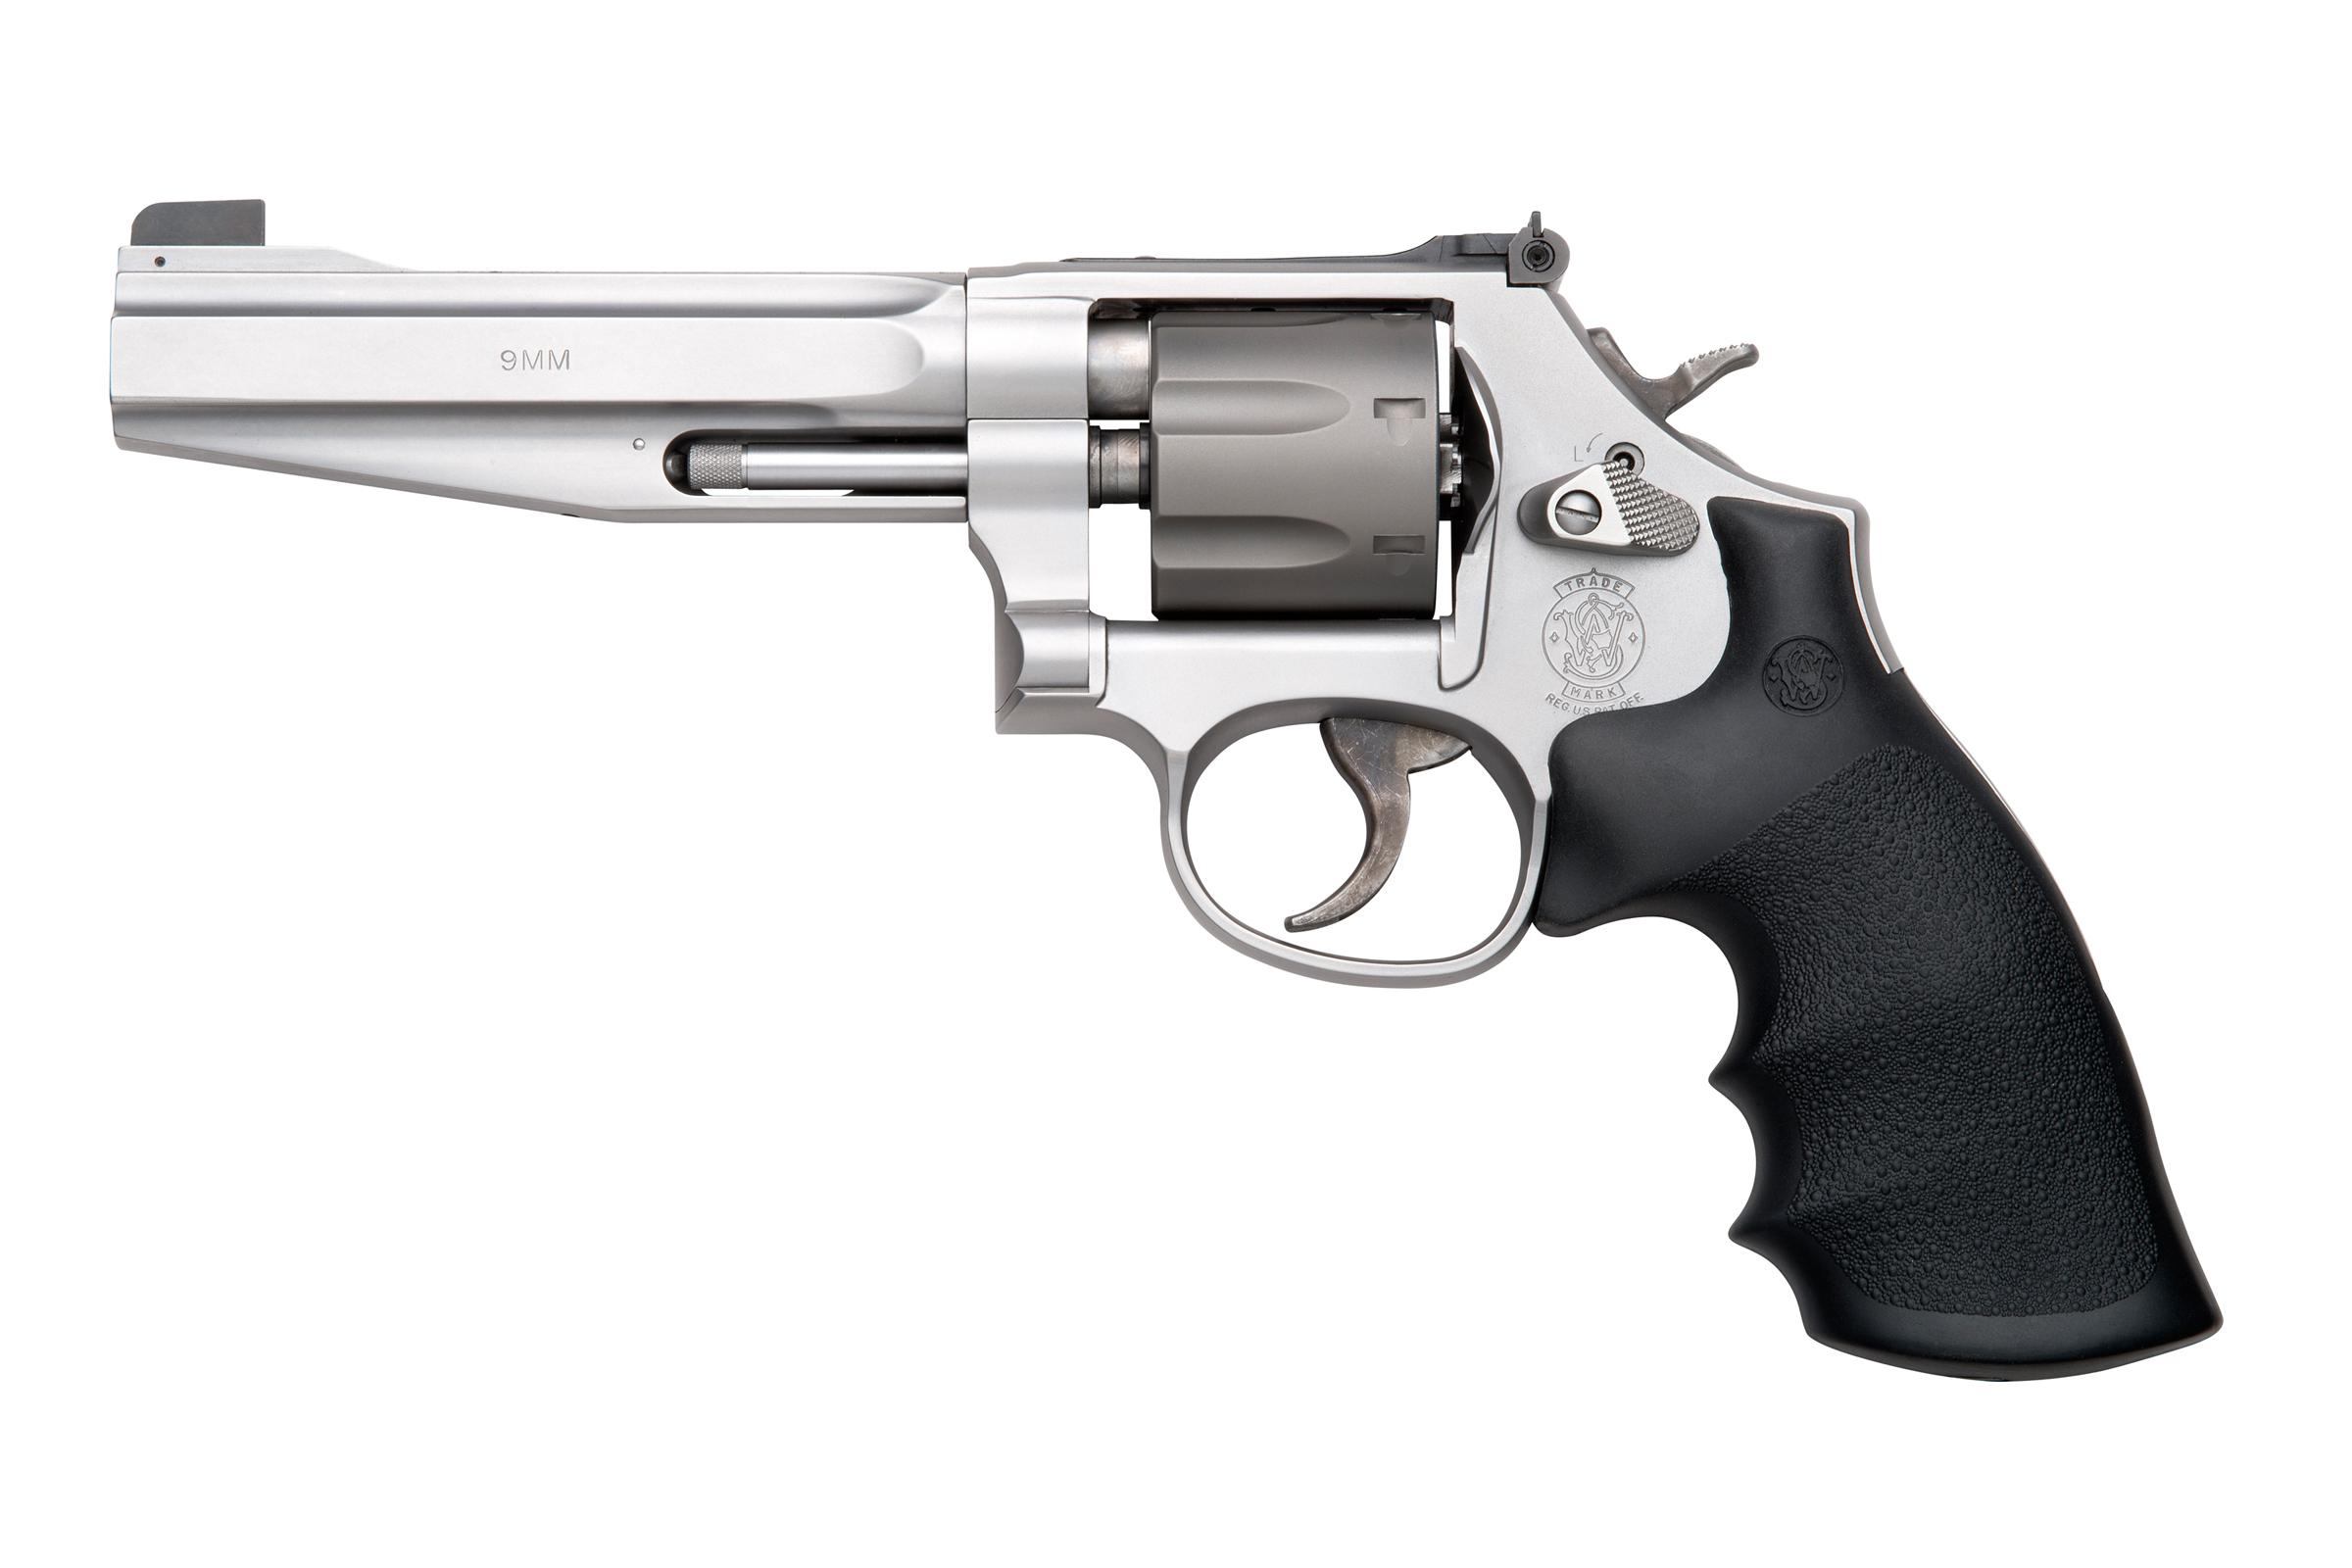  Smith & Wesson Performance Center 986 5 